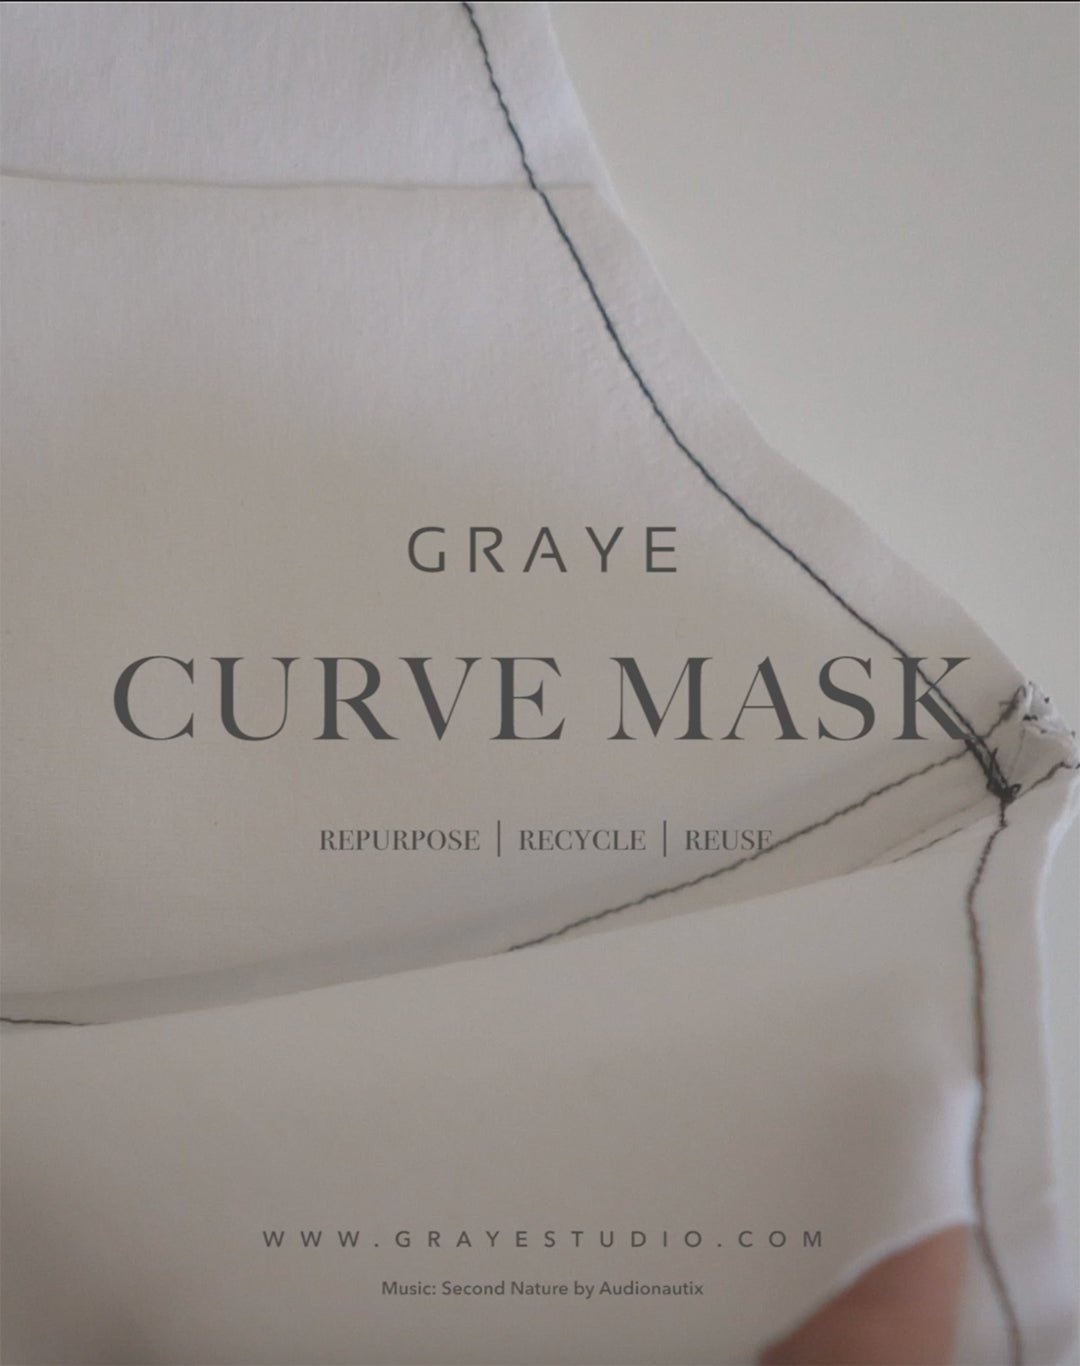 UPCYCLING WITH GRAYE: DIY CURVE MASK - G R A Y E